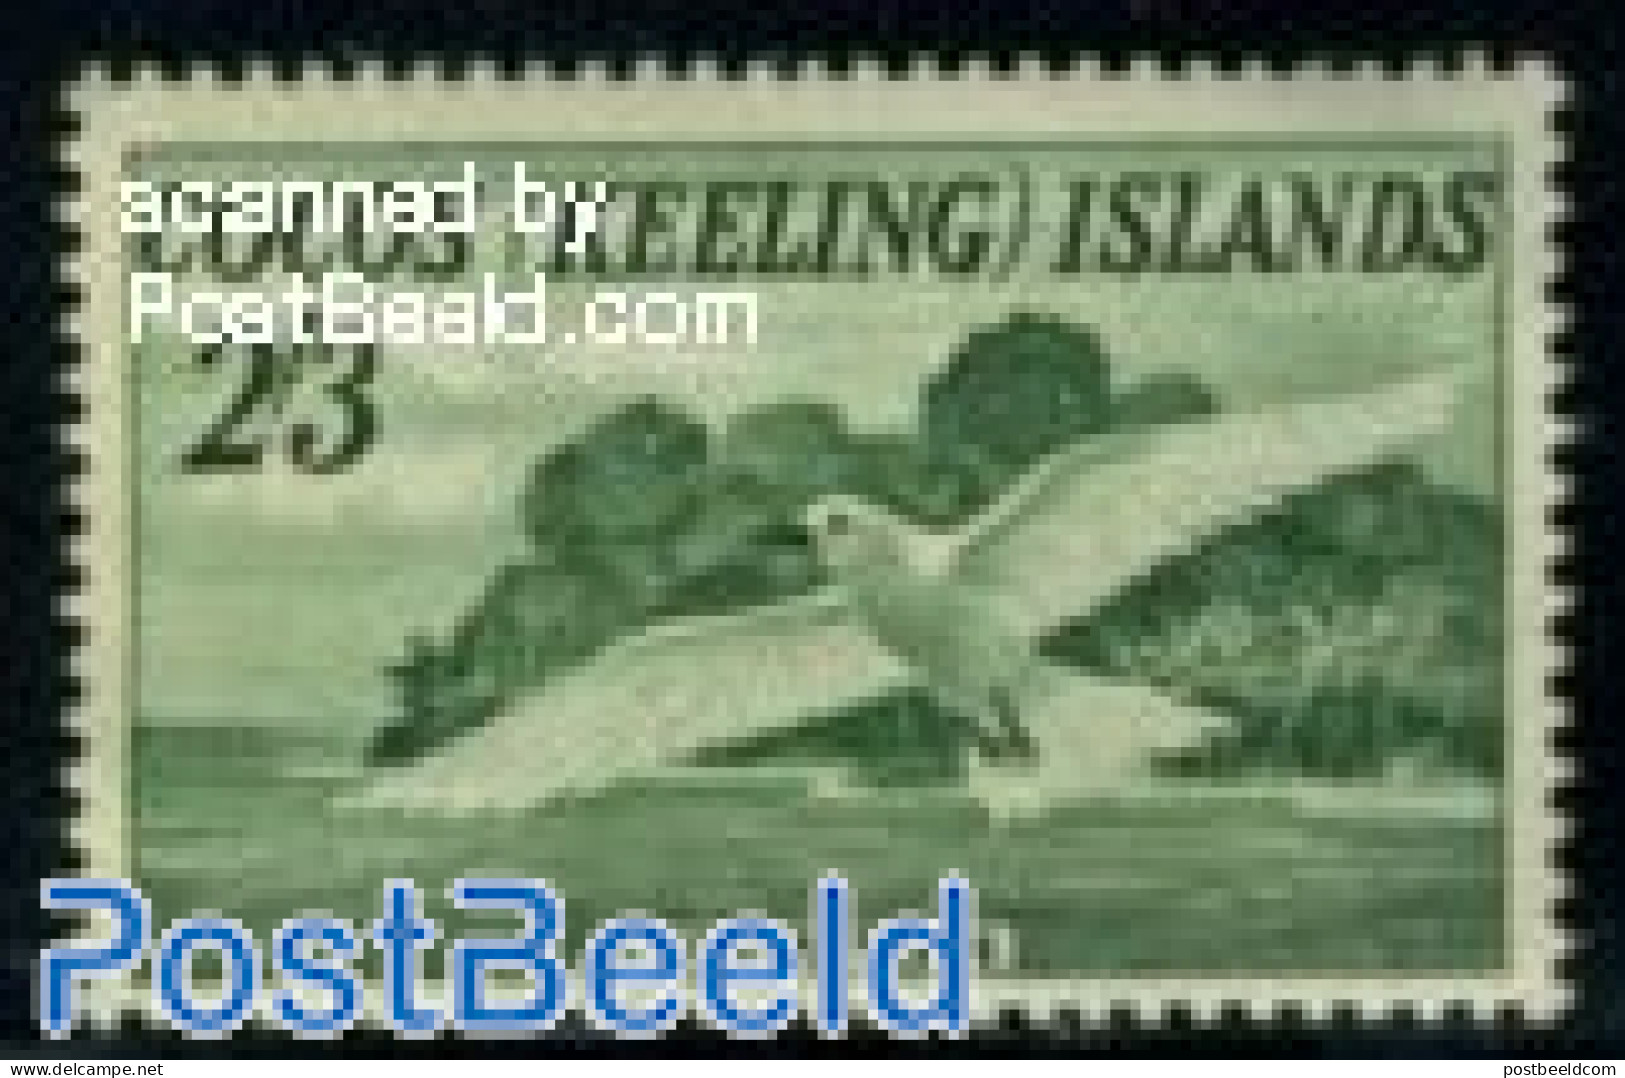 Cocos Islands 1963 2Sh3p, Stamp Out Of Set, Mint NH, Nature - Birds - Islas Cocos (Keeling)